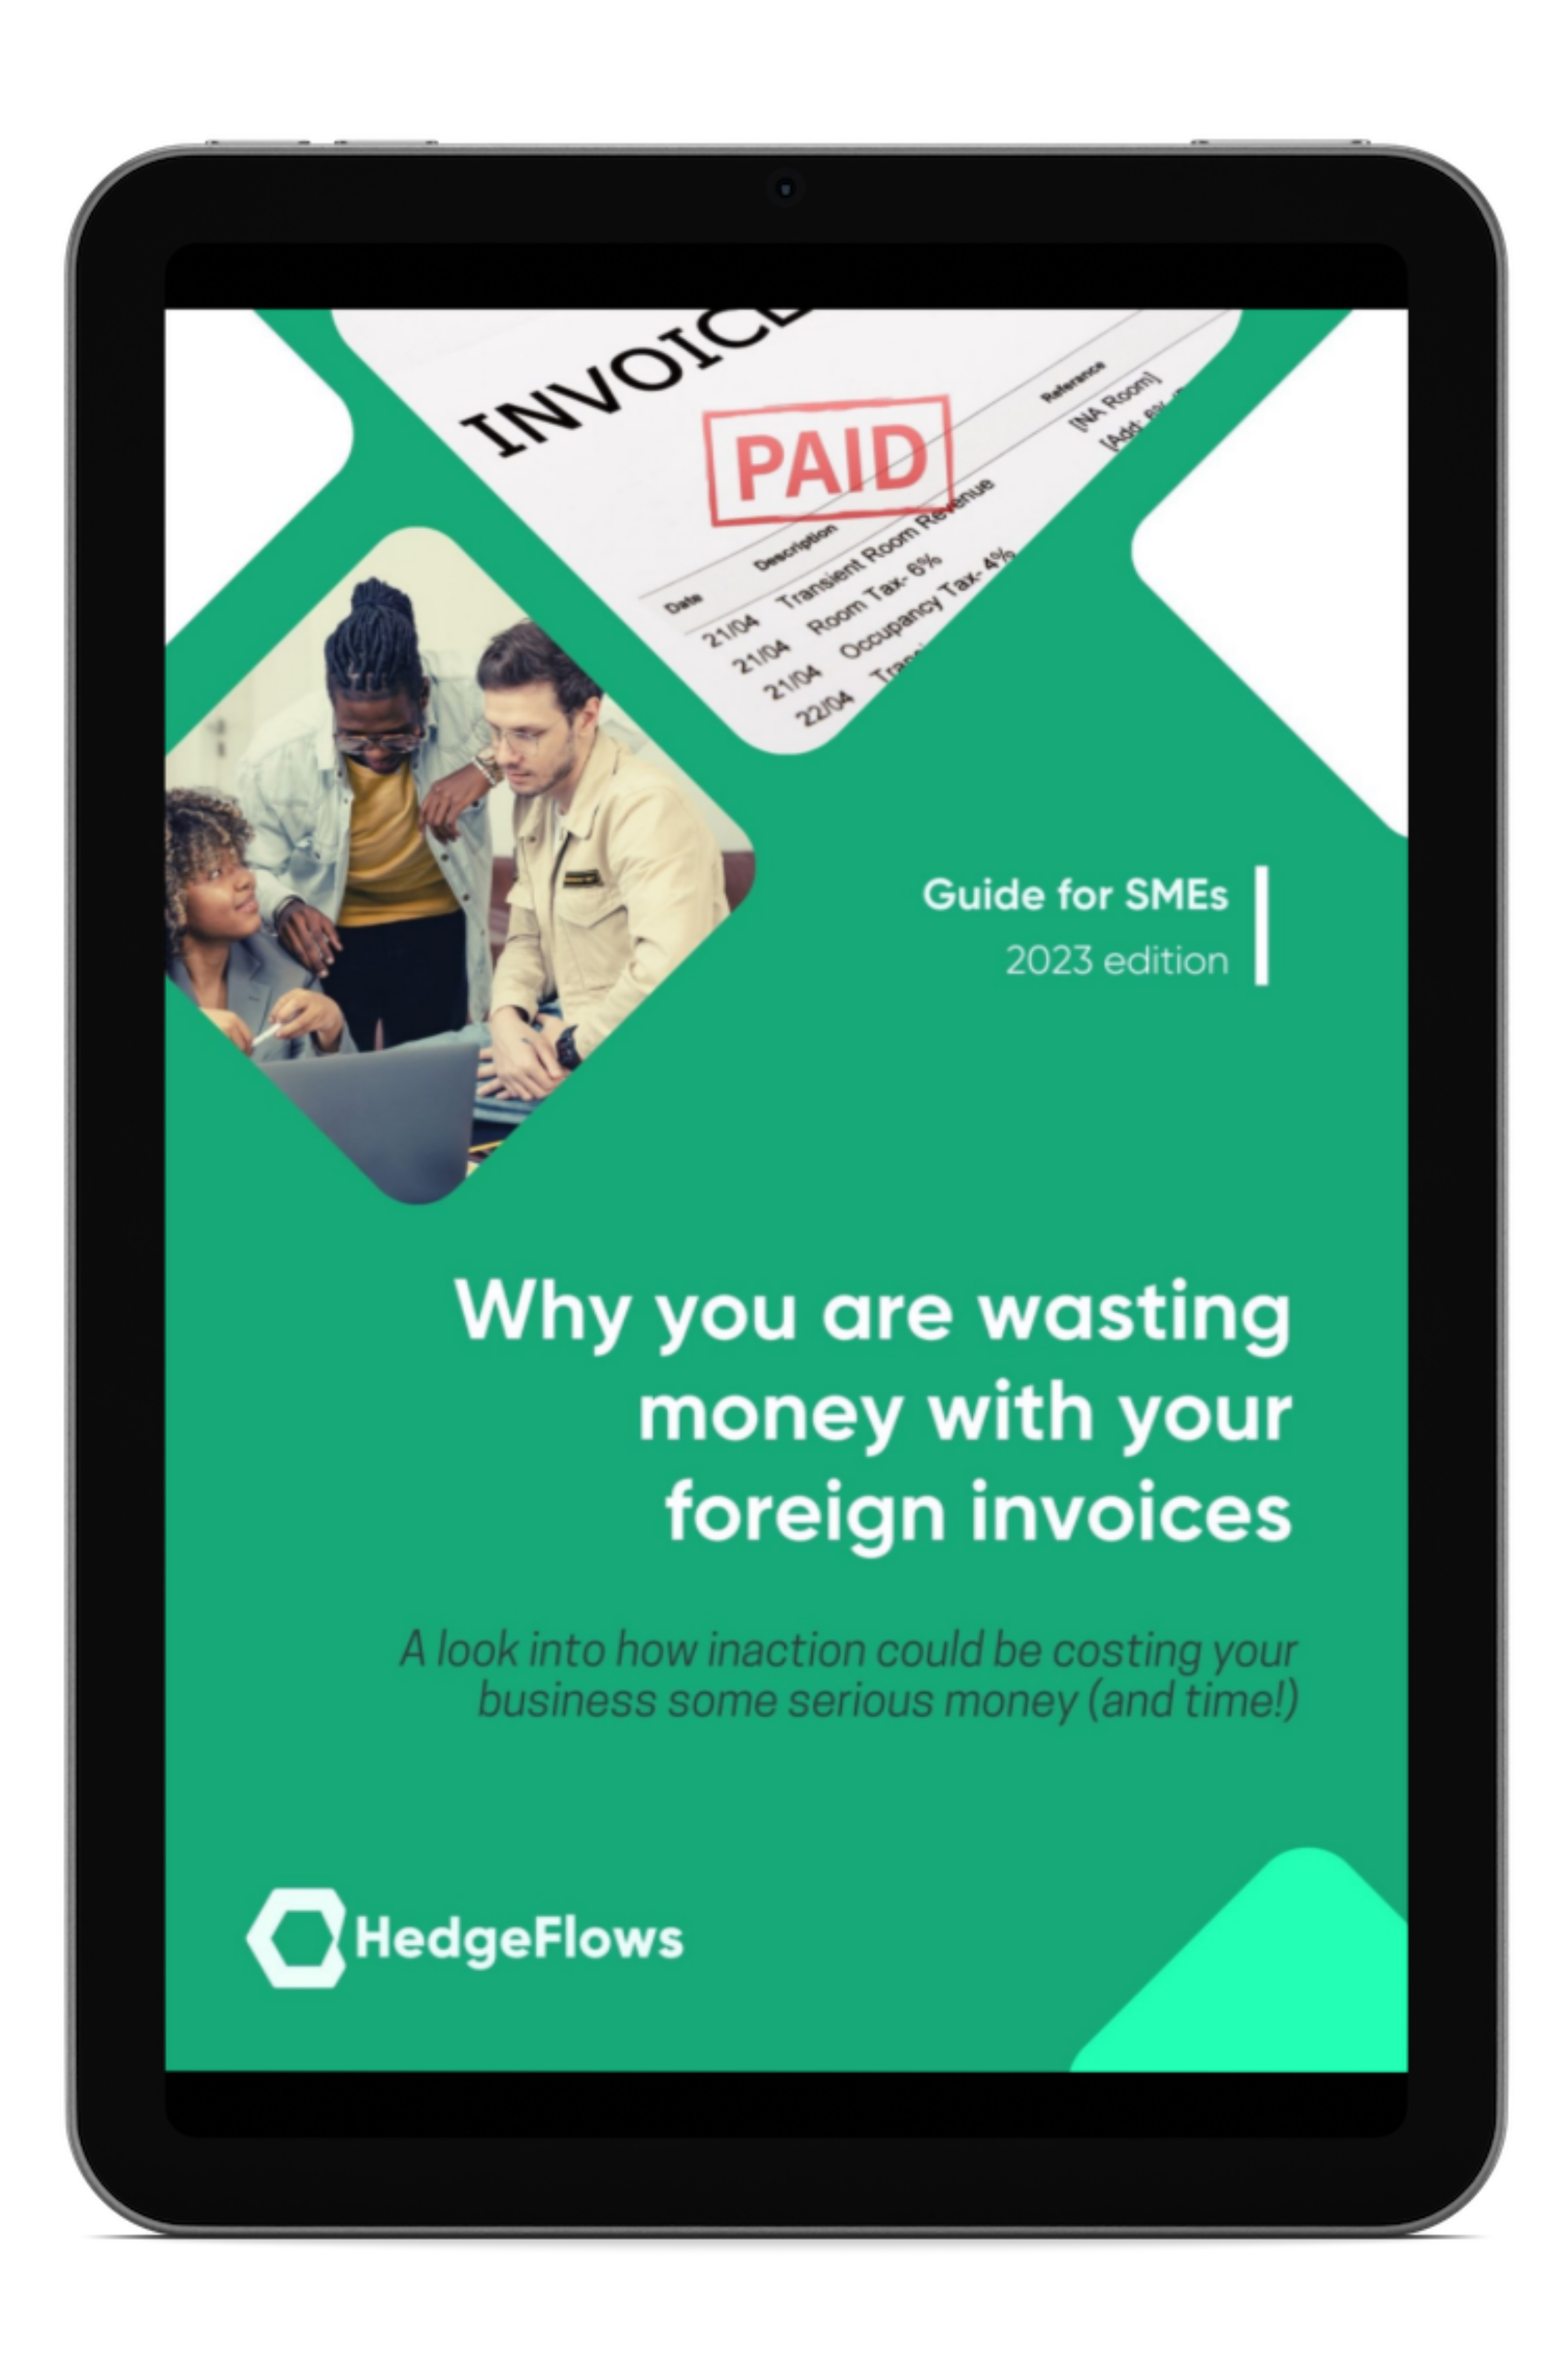 How to save money and time with foreign invoices guide